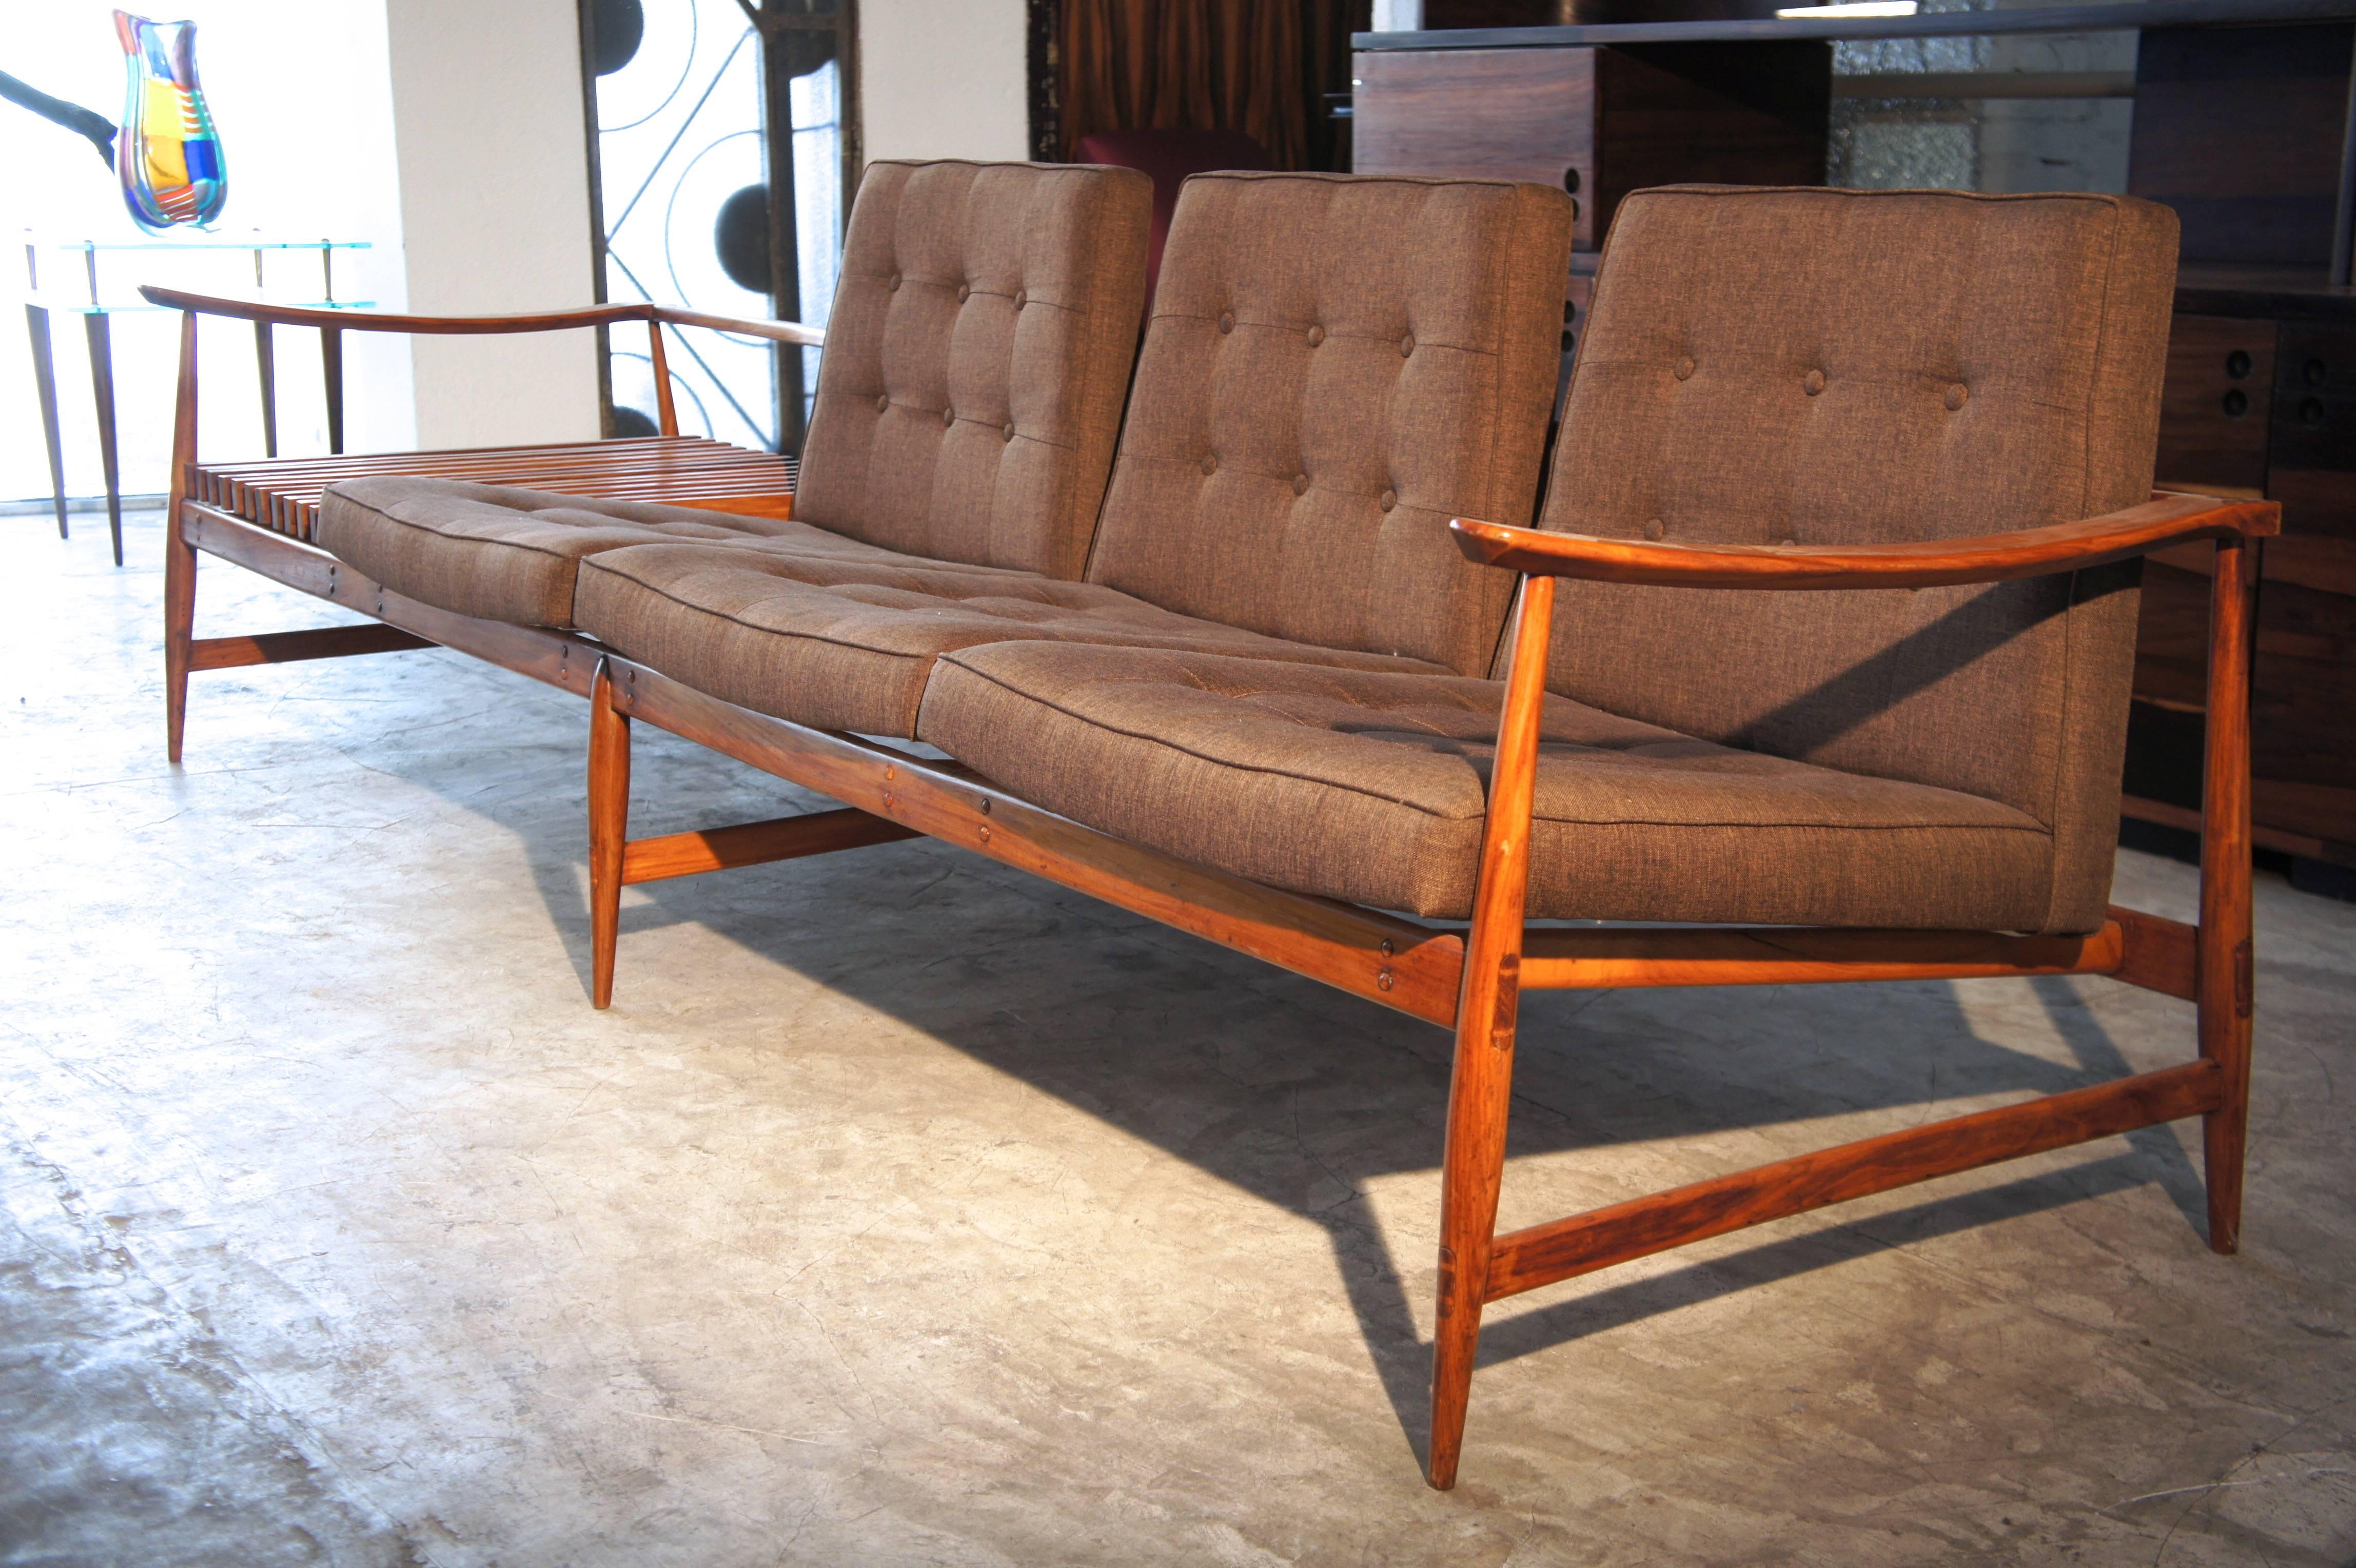 This is a fine sofa made of caviuna wood by the Liceu de Artes e Ofícios. This amazing sofa features a moving magazine holder made of solid caviuna wood too. It has been recently restored and polished. This model is quite unusual because is has a